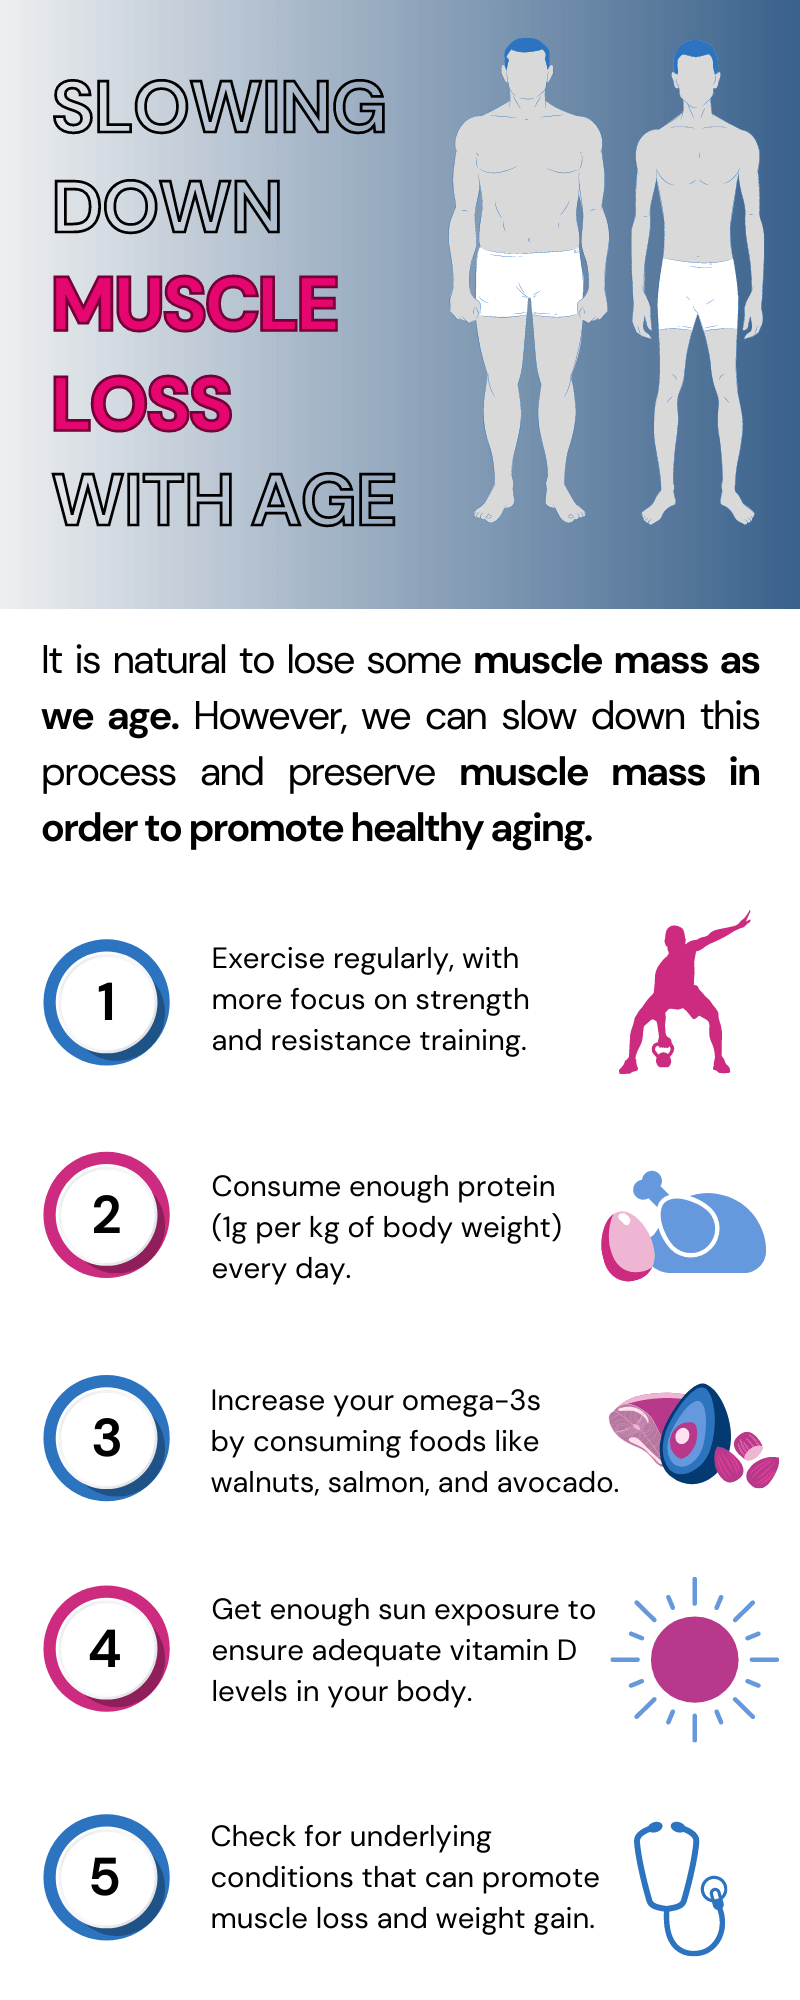 What Vitamin Stops Age-Related Muscle Loss?